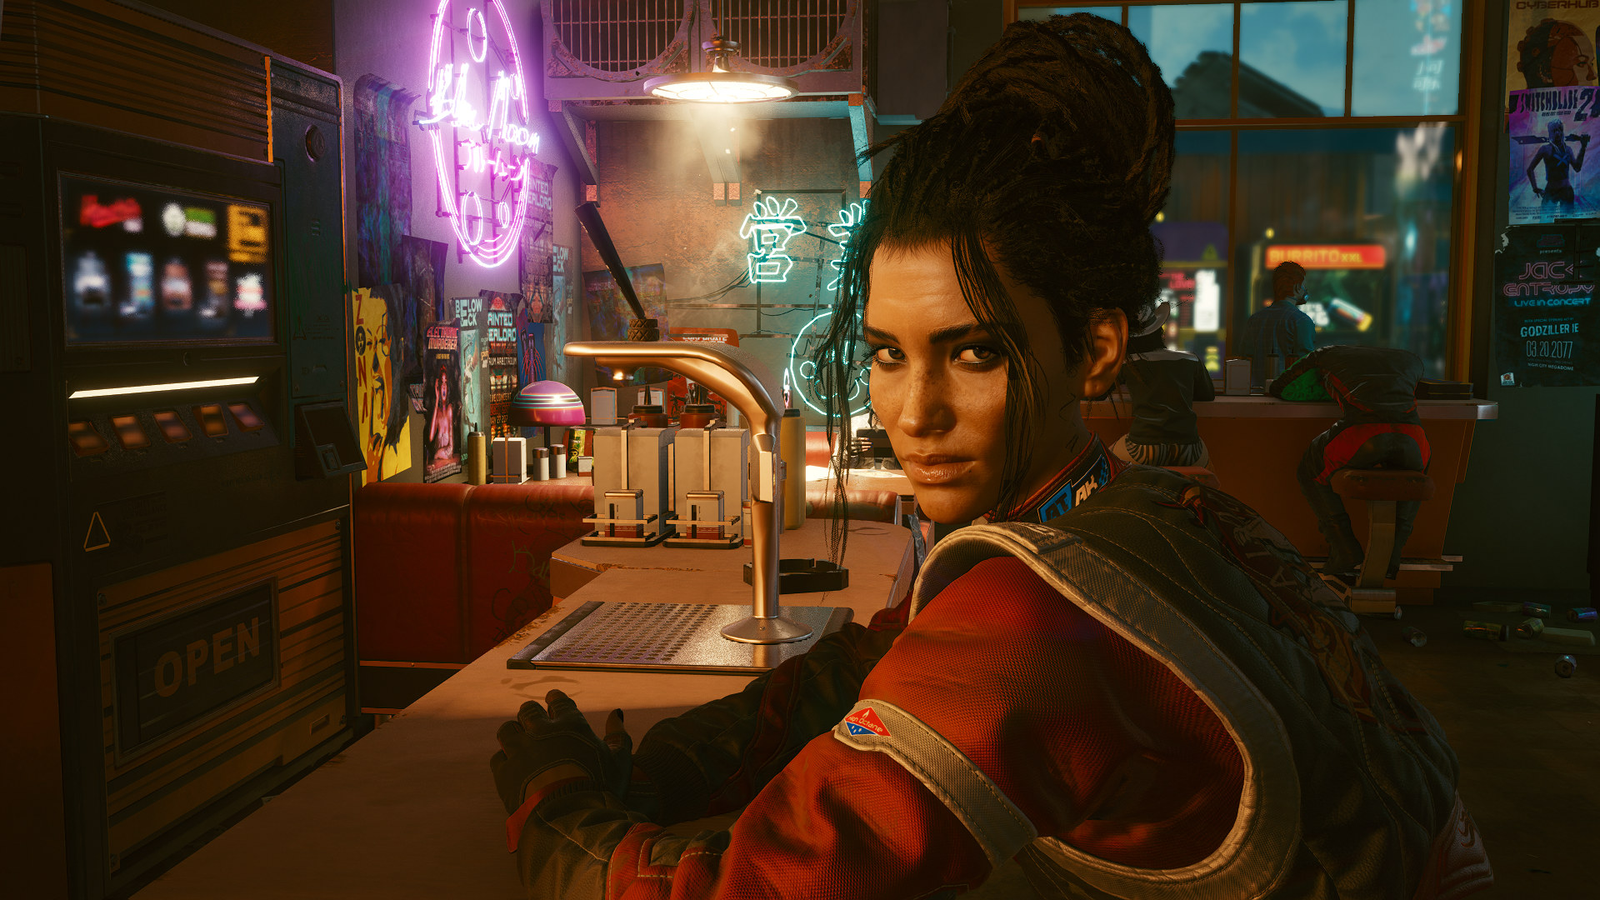 Cyberpunk 2077 | Download and Play Cyberpunk For PC – Epic Games Store